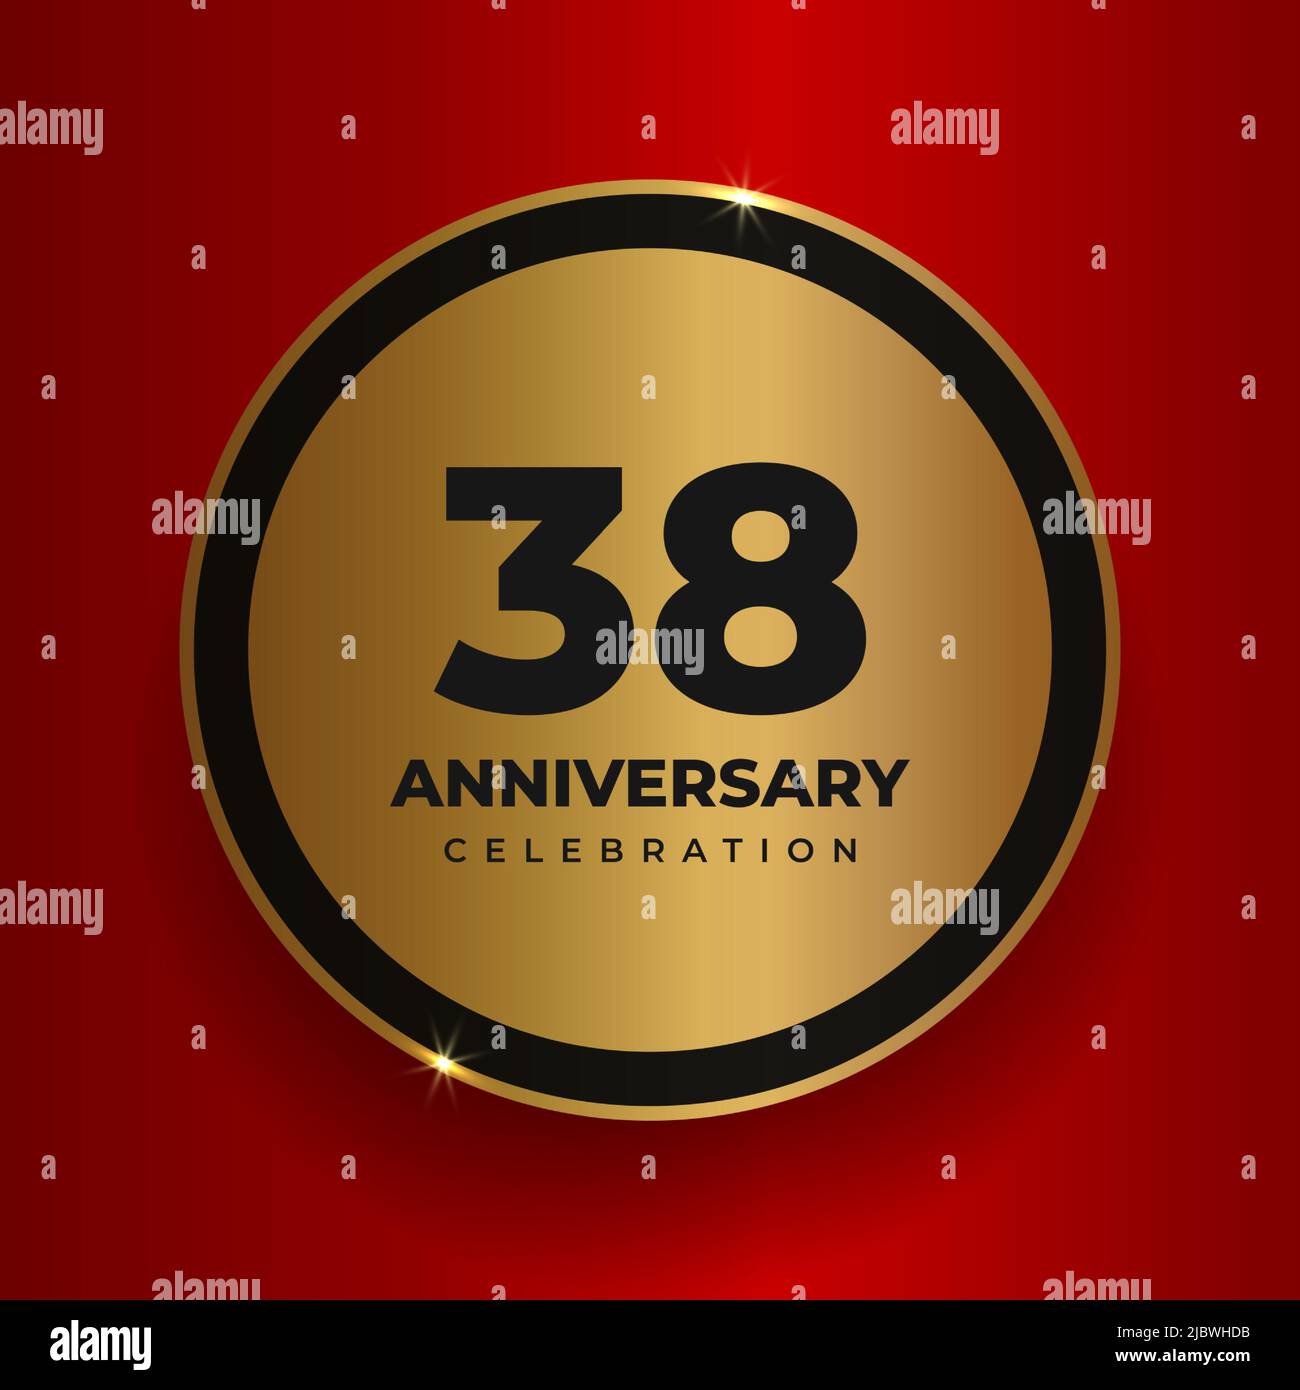 38 years anniversary celebration background. Celebrating 38th anniversary event party poster template. Vector golden circle with numbers and text on Stock Vector